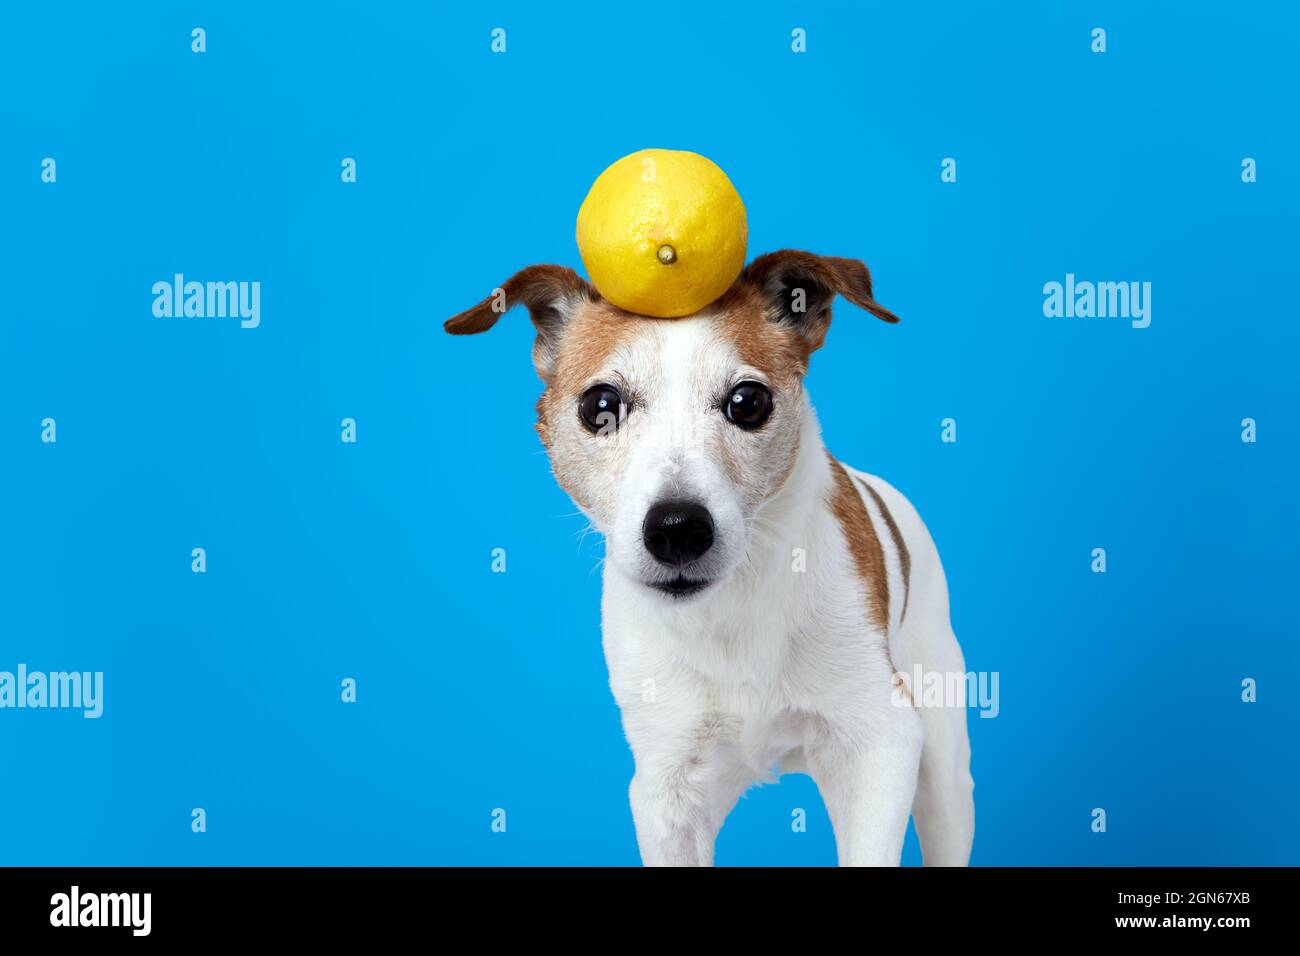 Cute funny Jack Russell Terrier dog with whole fresh yellow lemon on head looking at camera against blue background Stock Photo